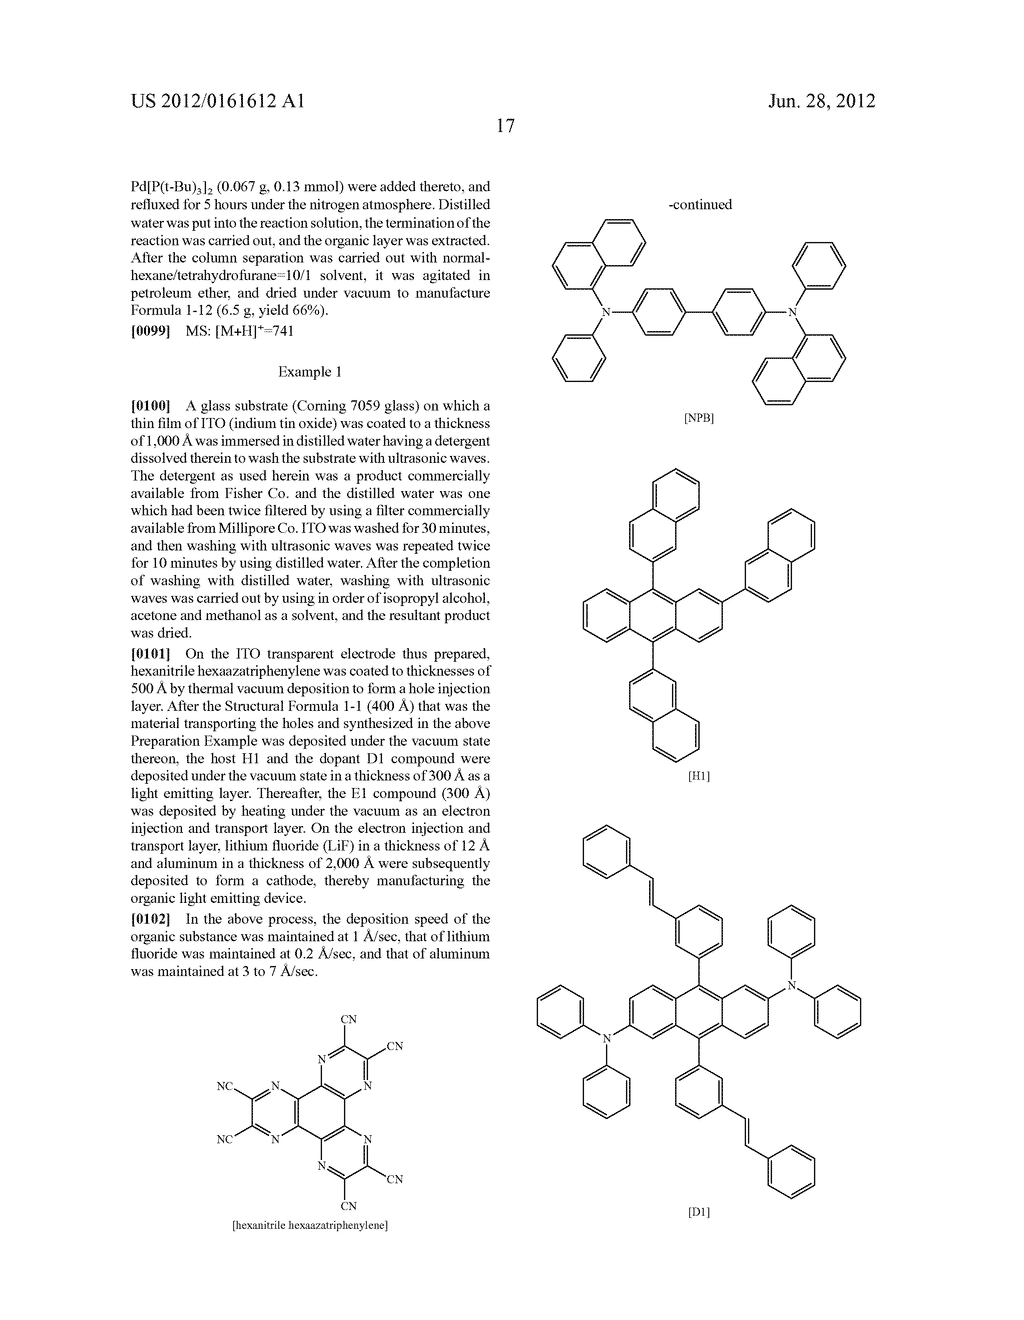 NEW HETEROCYCLIC DERIVATIVE AND ORGANIC LIGHT EMITTING DEVICE USING SAME - diagram, schematic, and image 19